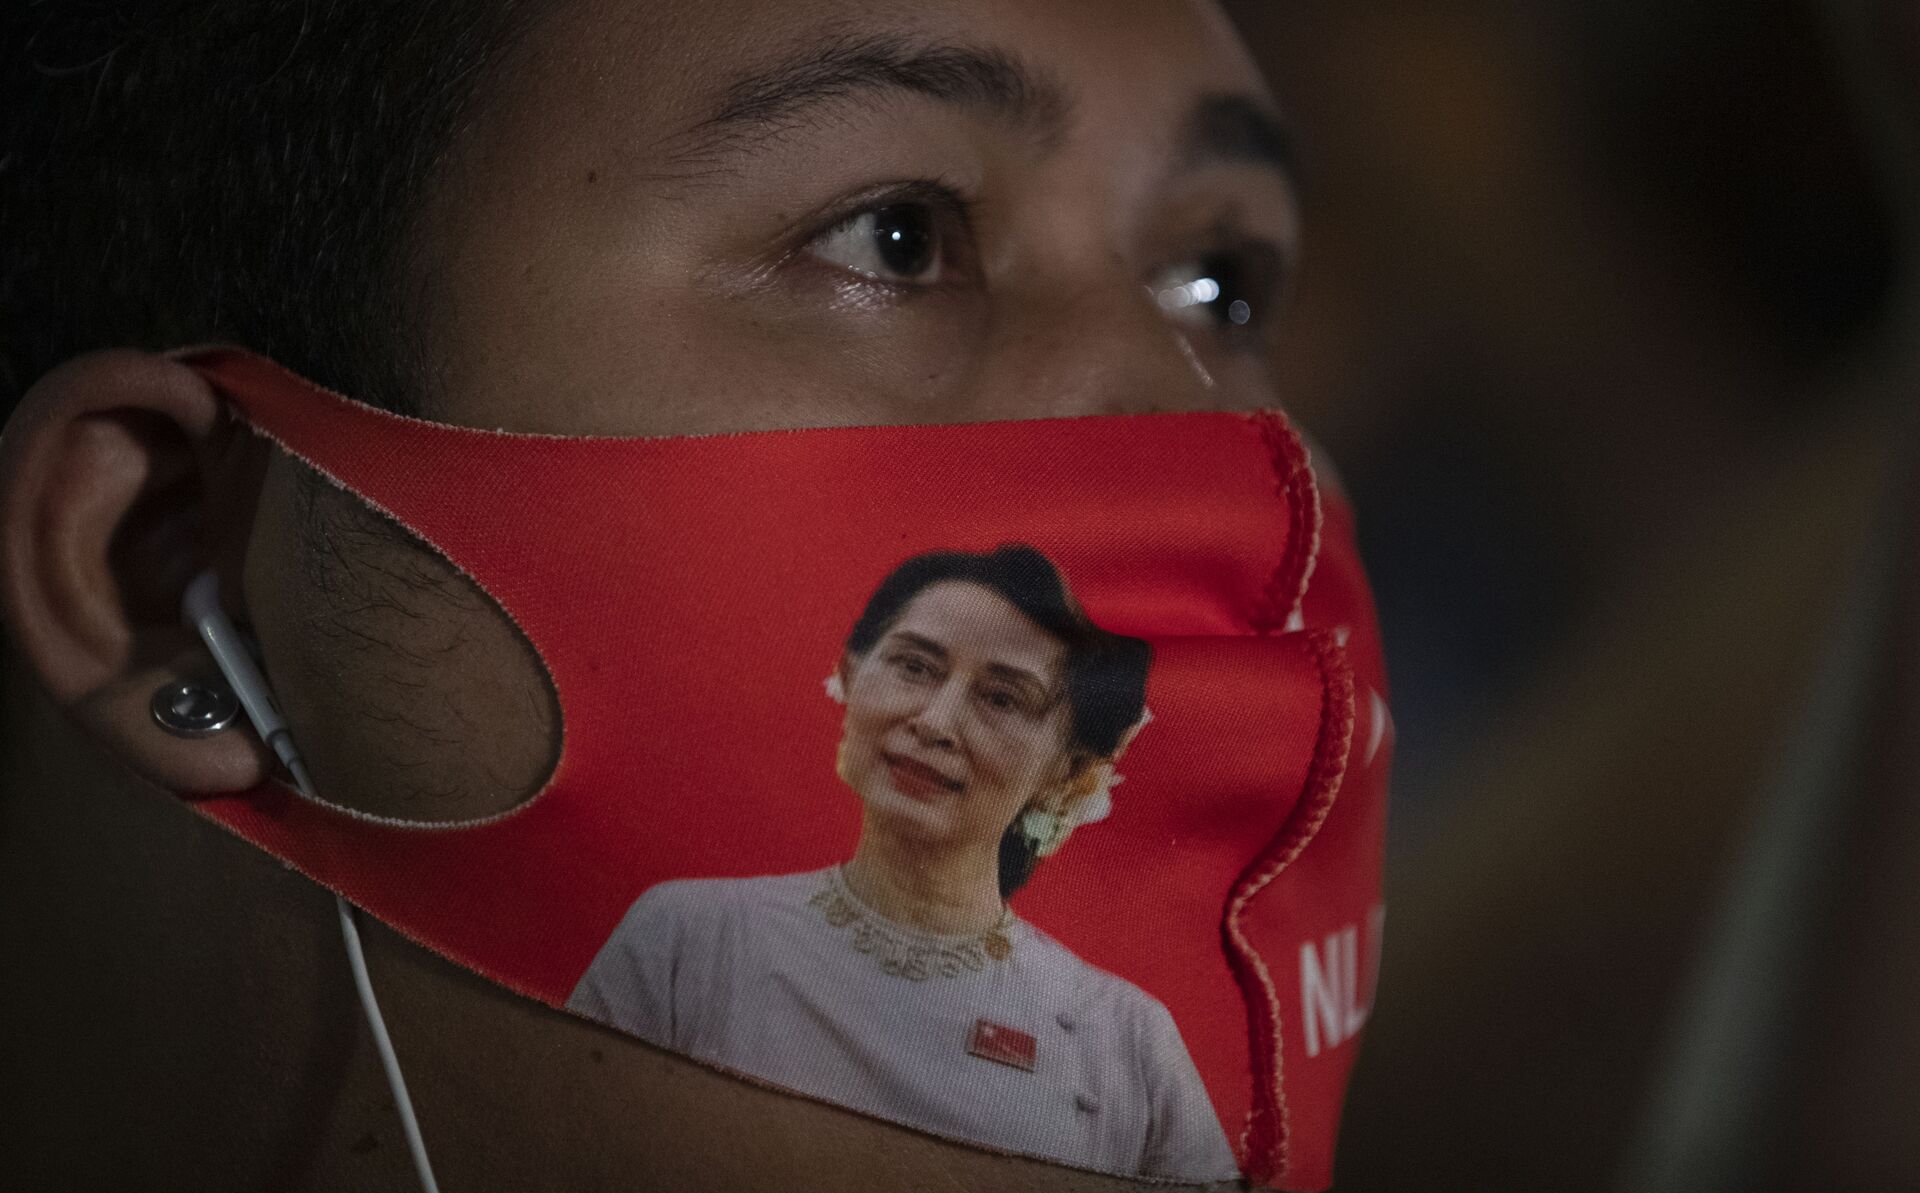 A Myanmar national living in Thailand wears a face mask with the image of Myanmar leader Aung San Suu Kyi during a protest in front of Myanmar Embassy in Bangkok, Thailand, Thursday, Feb. 4, 2021. The military announced Monday that it will take power for one year, accusing Suu Kyi's government of not investigating allegations of voter fraud in recent elections. Suu Kyi's party swept that vote and the military-backed party did poorly. The state Election Commission has refuted the allegations. - Sputnik International, 1920, 12.10.2022